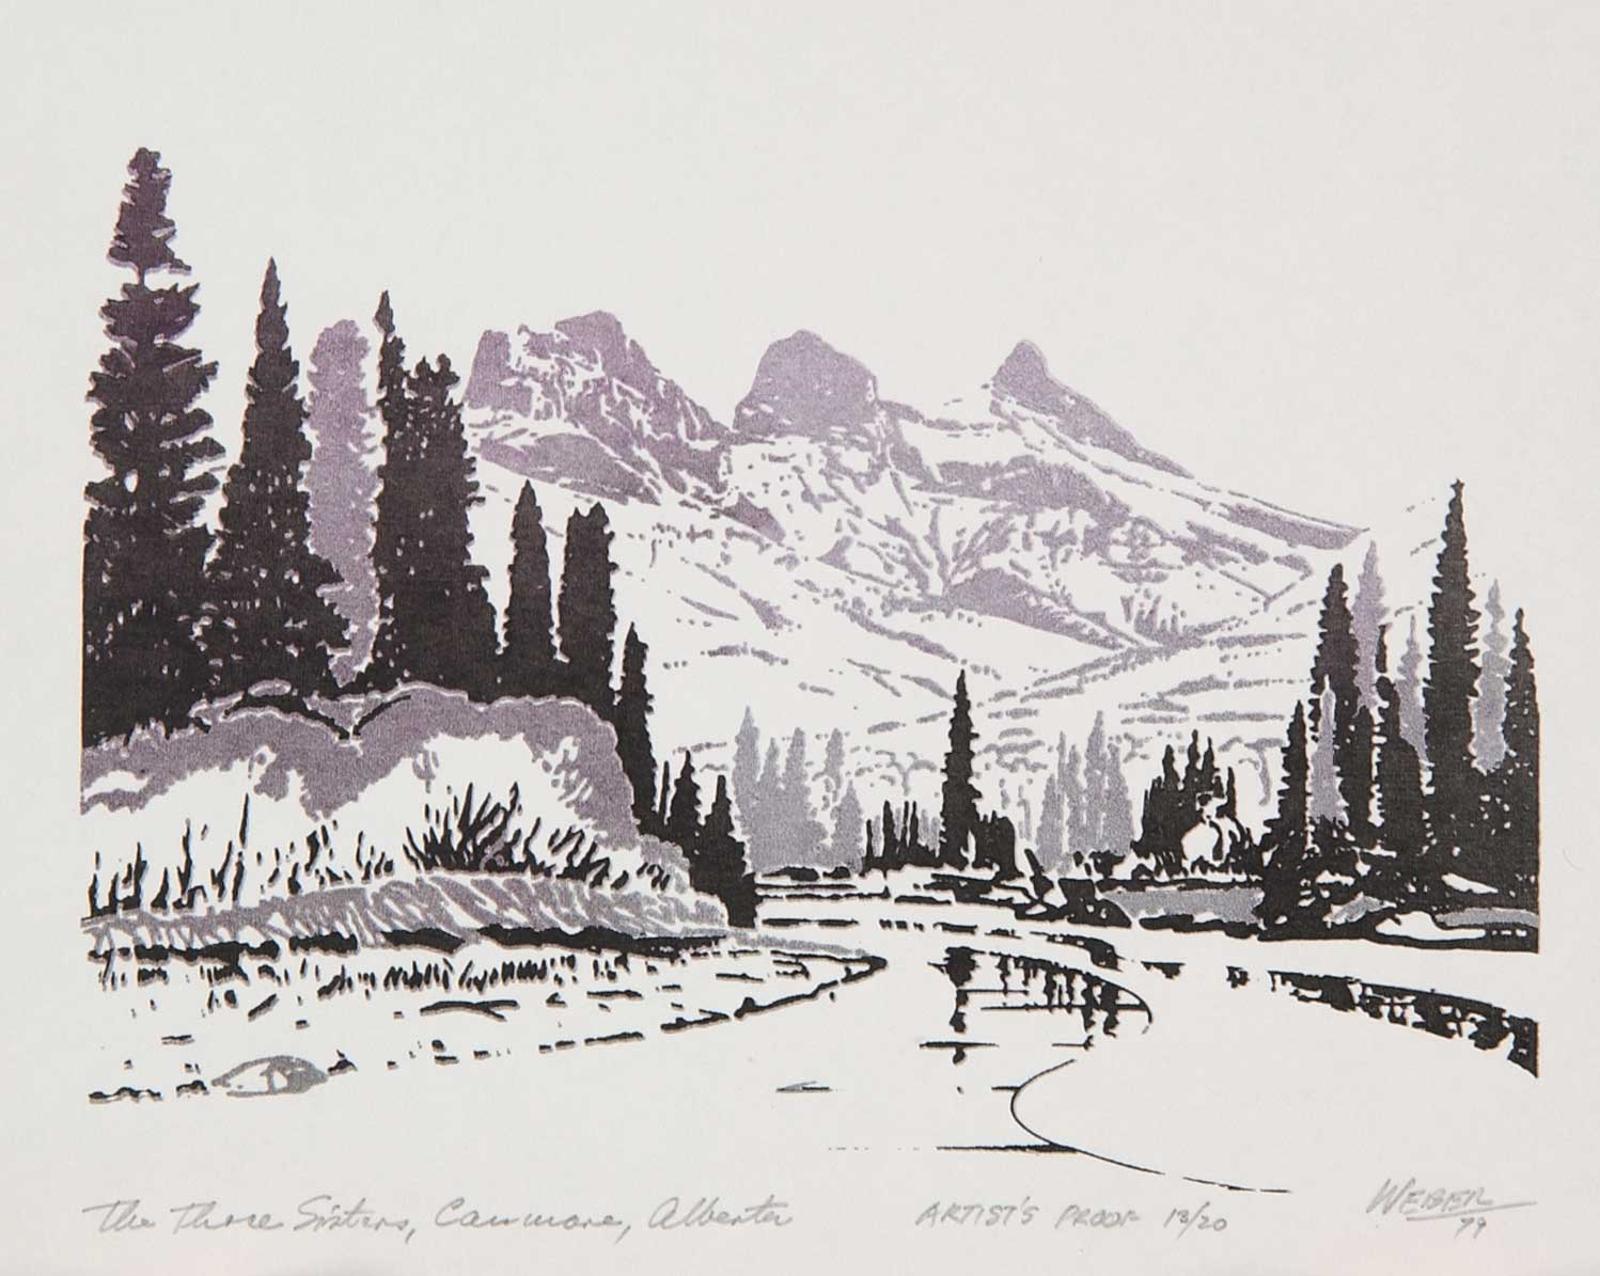 George Weber (1907-2002) - The Three Sisters, Canmore, Alberta  #Artist's Proof 13/20